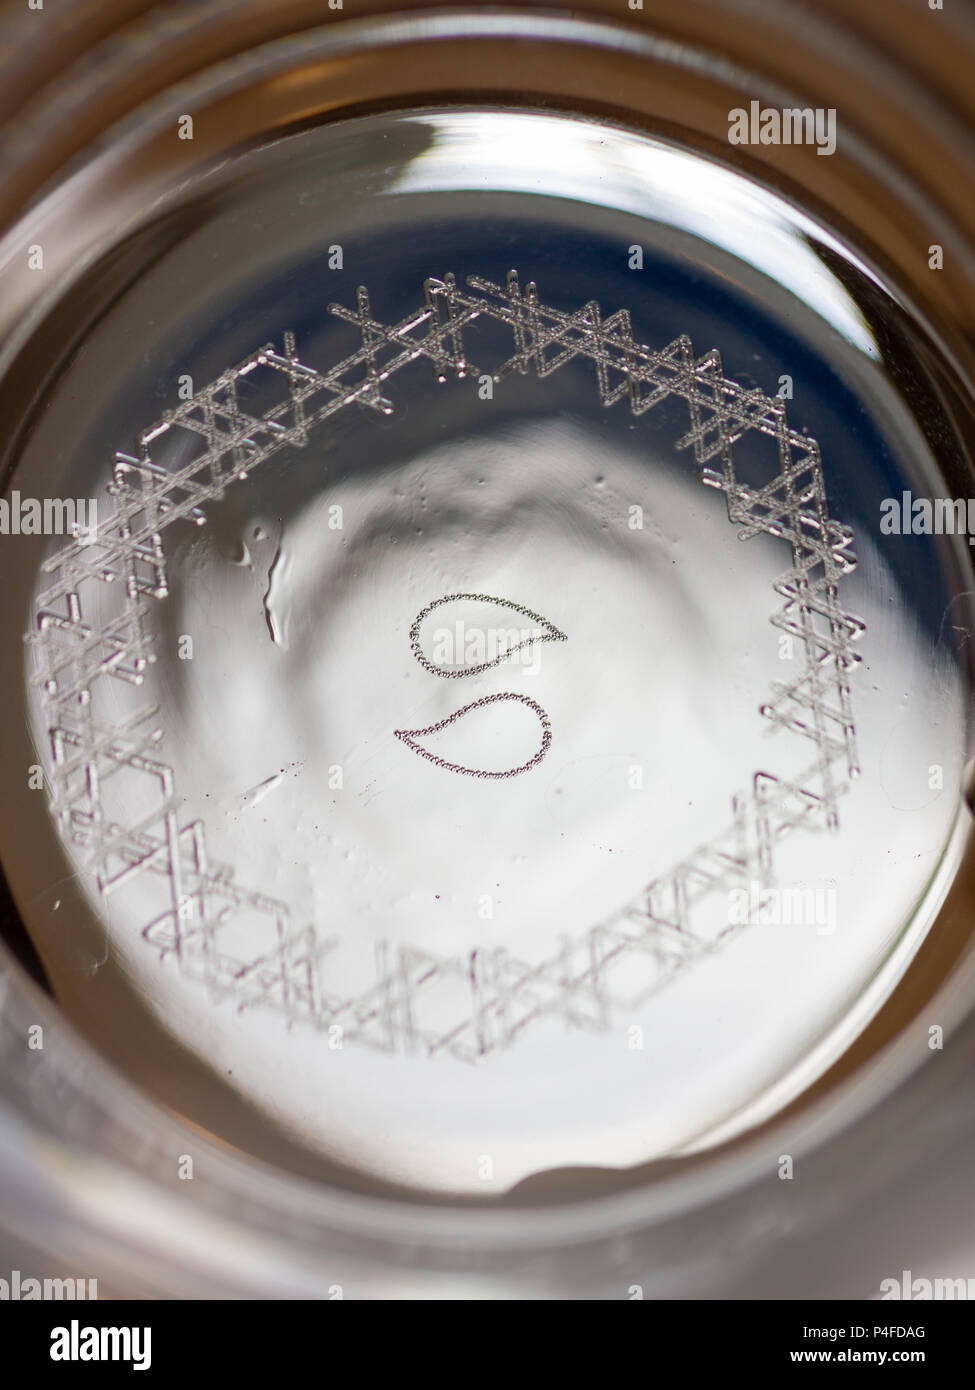 Nucleation marks engraved with a laser on the bottom of a glass to increase  carbonation of beer Stock Photo - Alamy